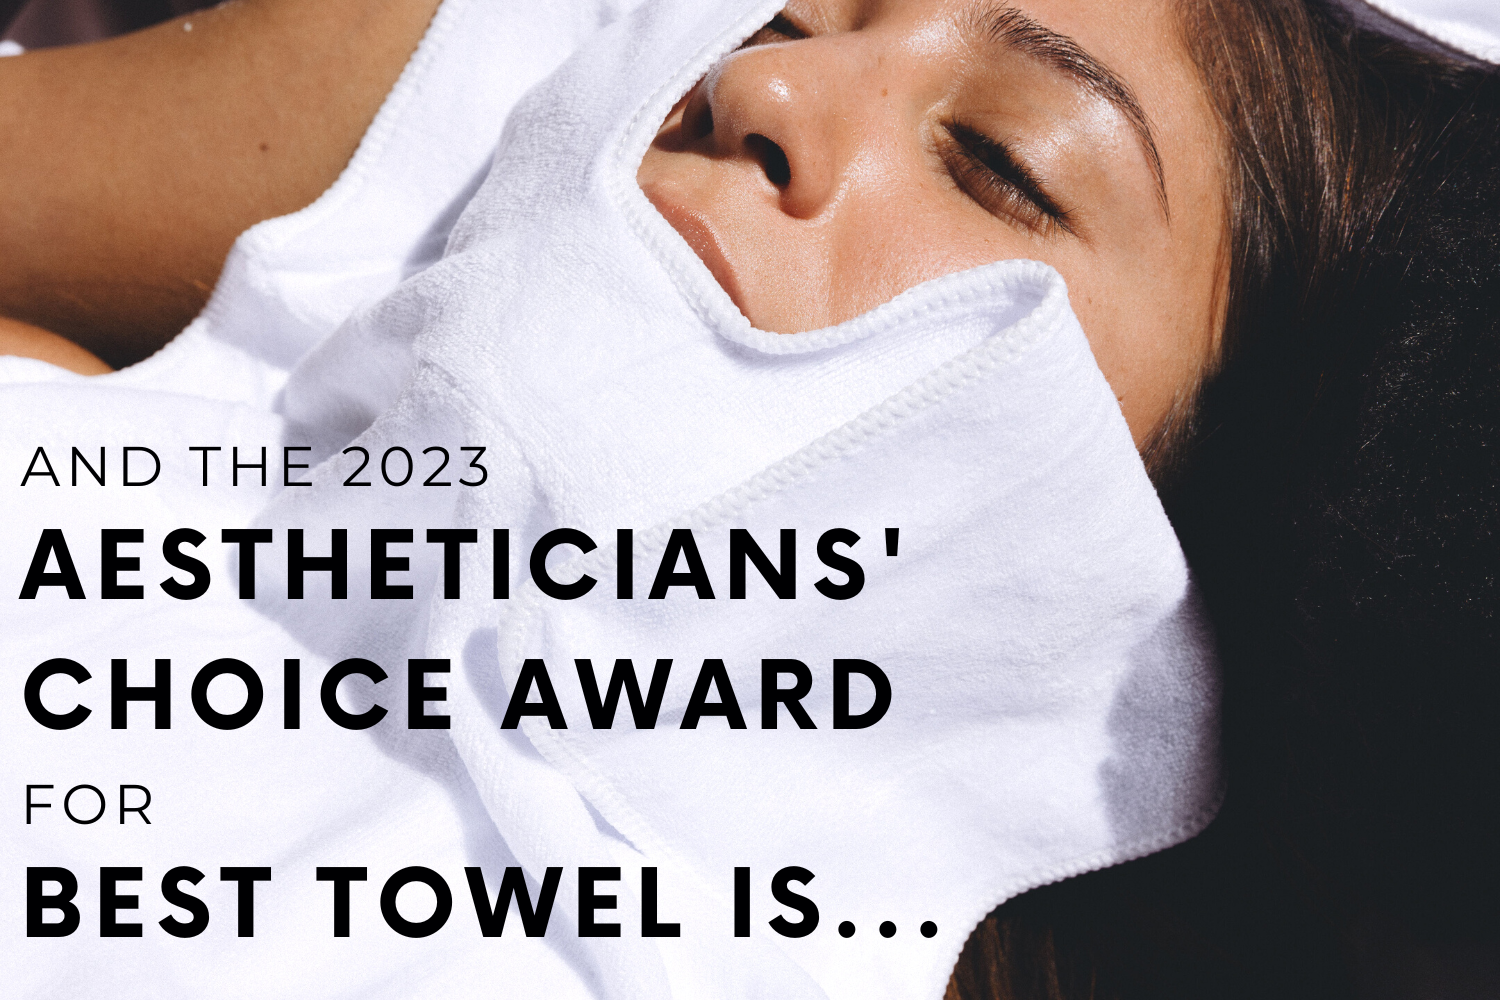 And the 2023 Aestheticians' Choice Award for Best Towel is...